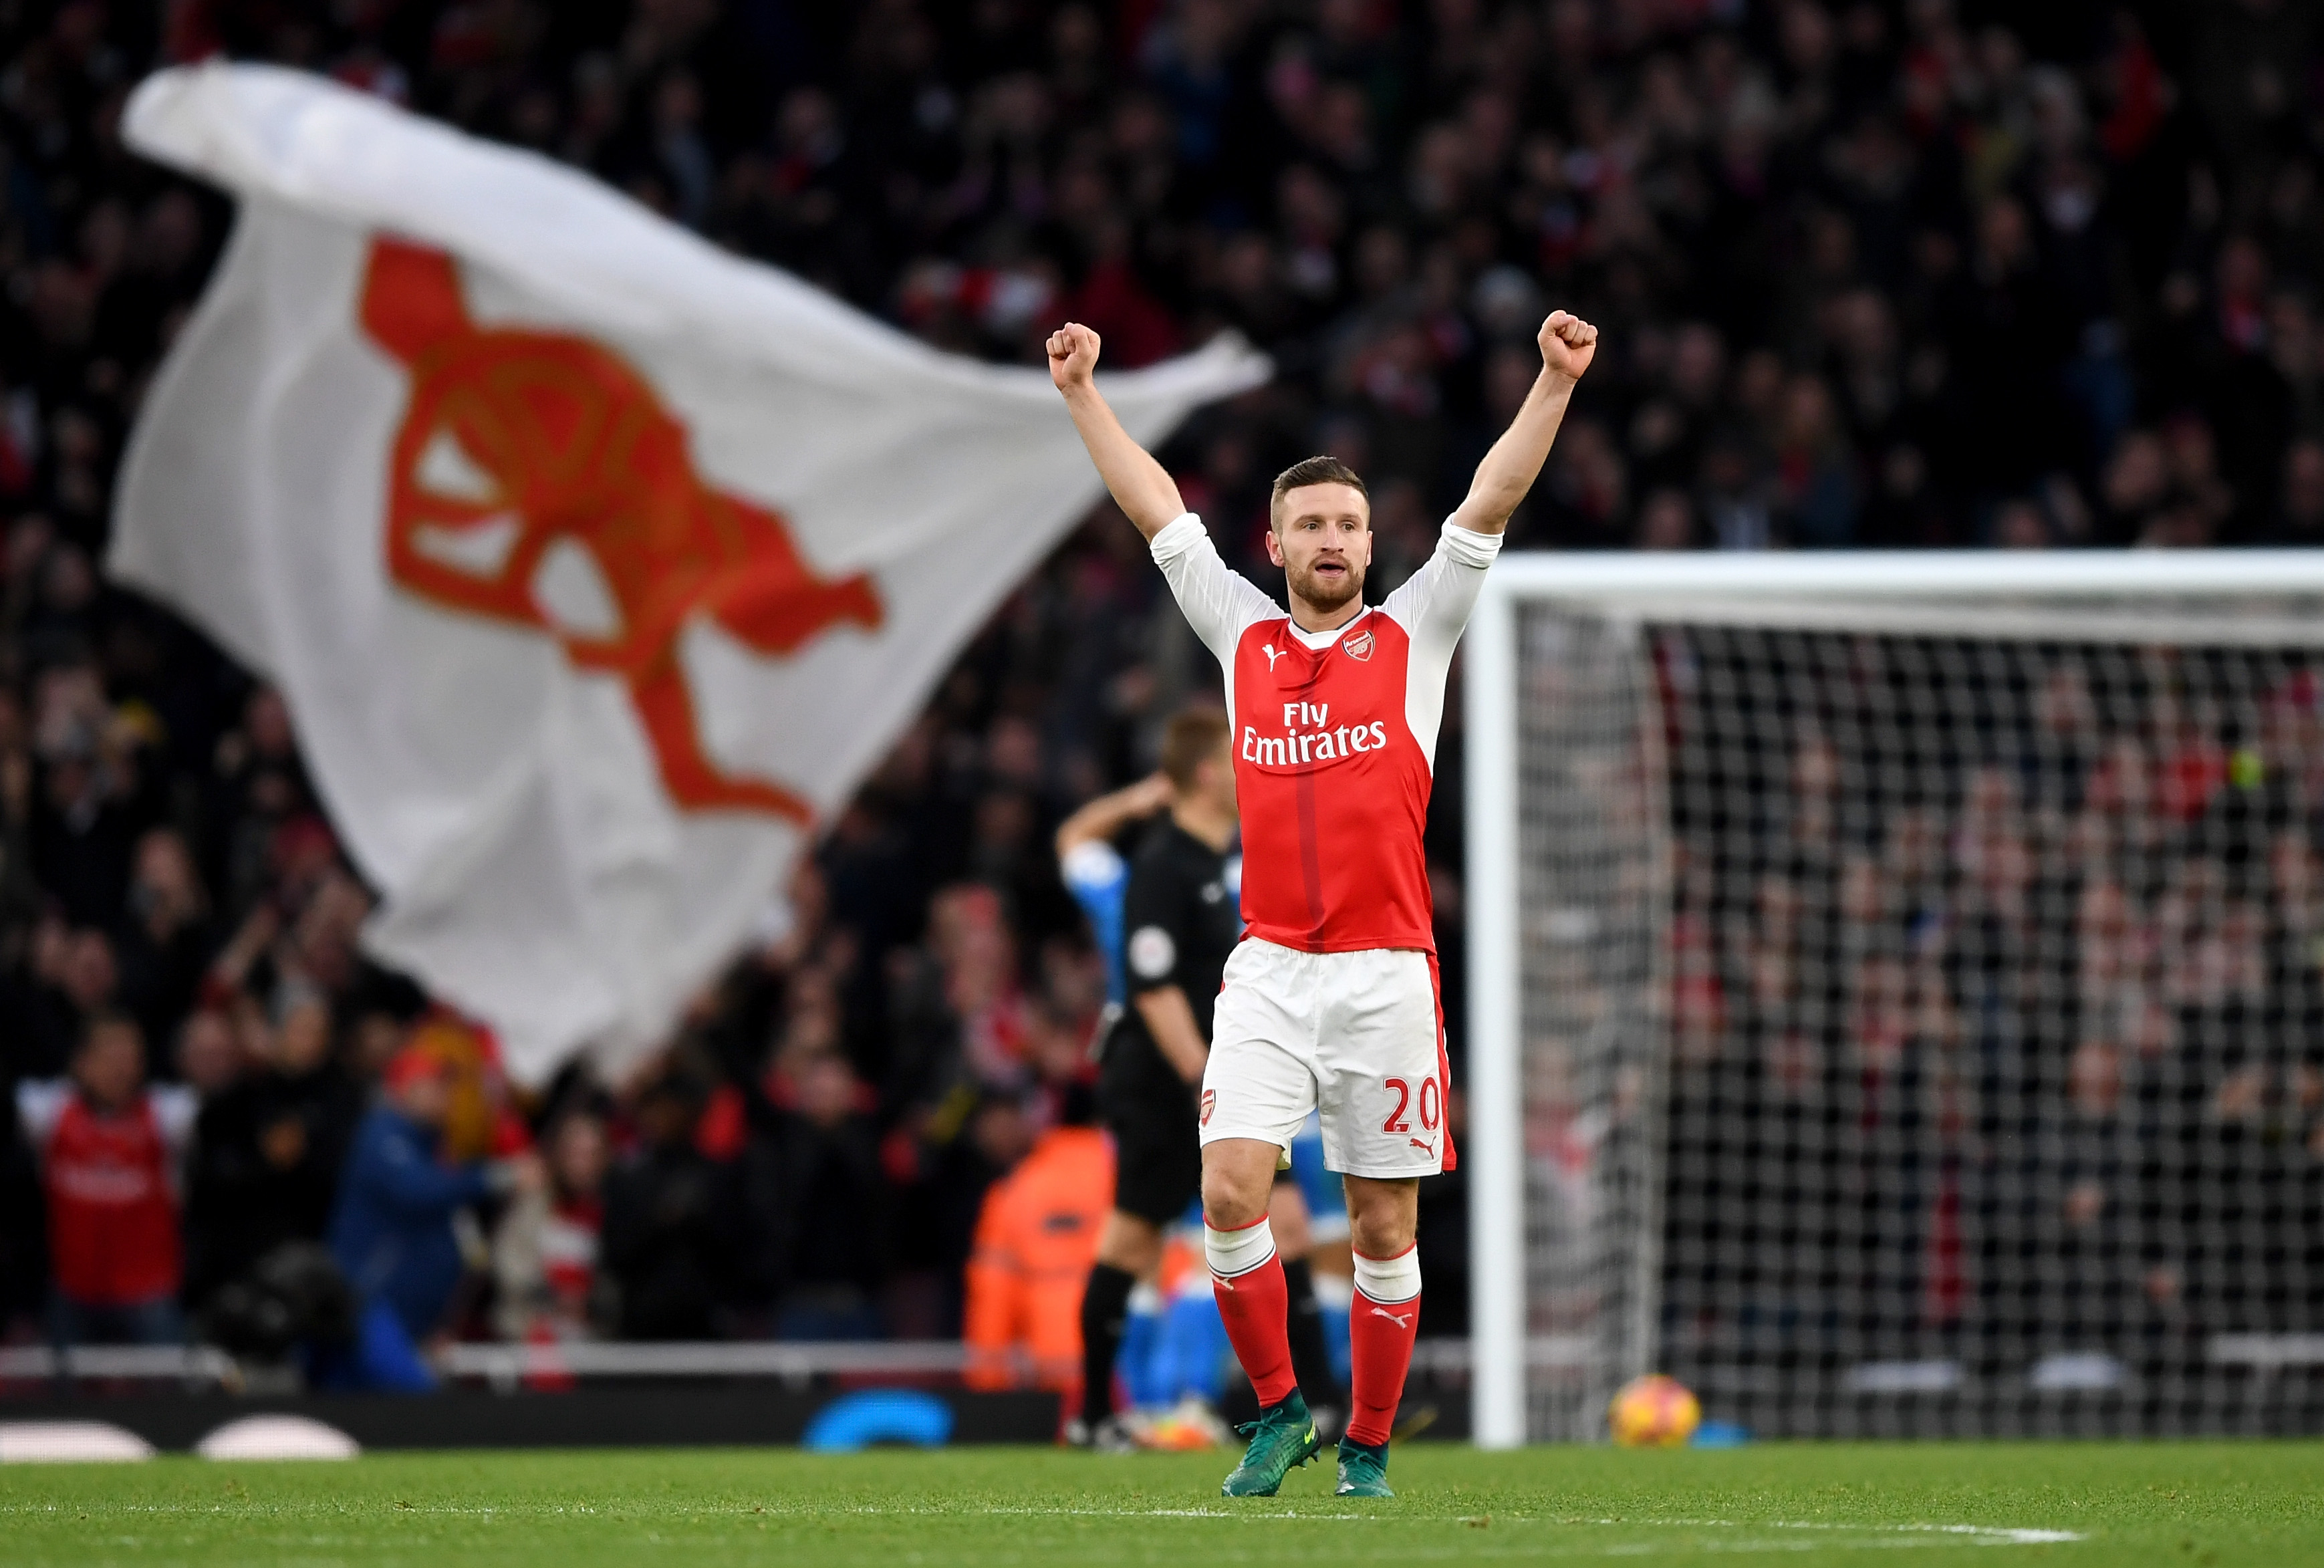 LONDON, ENGLAND - NOVEMBER 27:  Shkodran Mustafi of Arsenal celebrates his sides second goal during the Premier League match between Arsenal and AFC Bournemouth at Emirates Stadium on November 27, 2016 in London, England.  (Photo by Shaun Botterill/Getty Images)